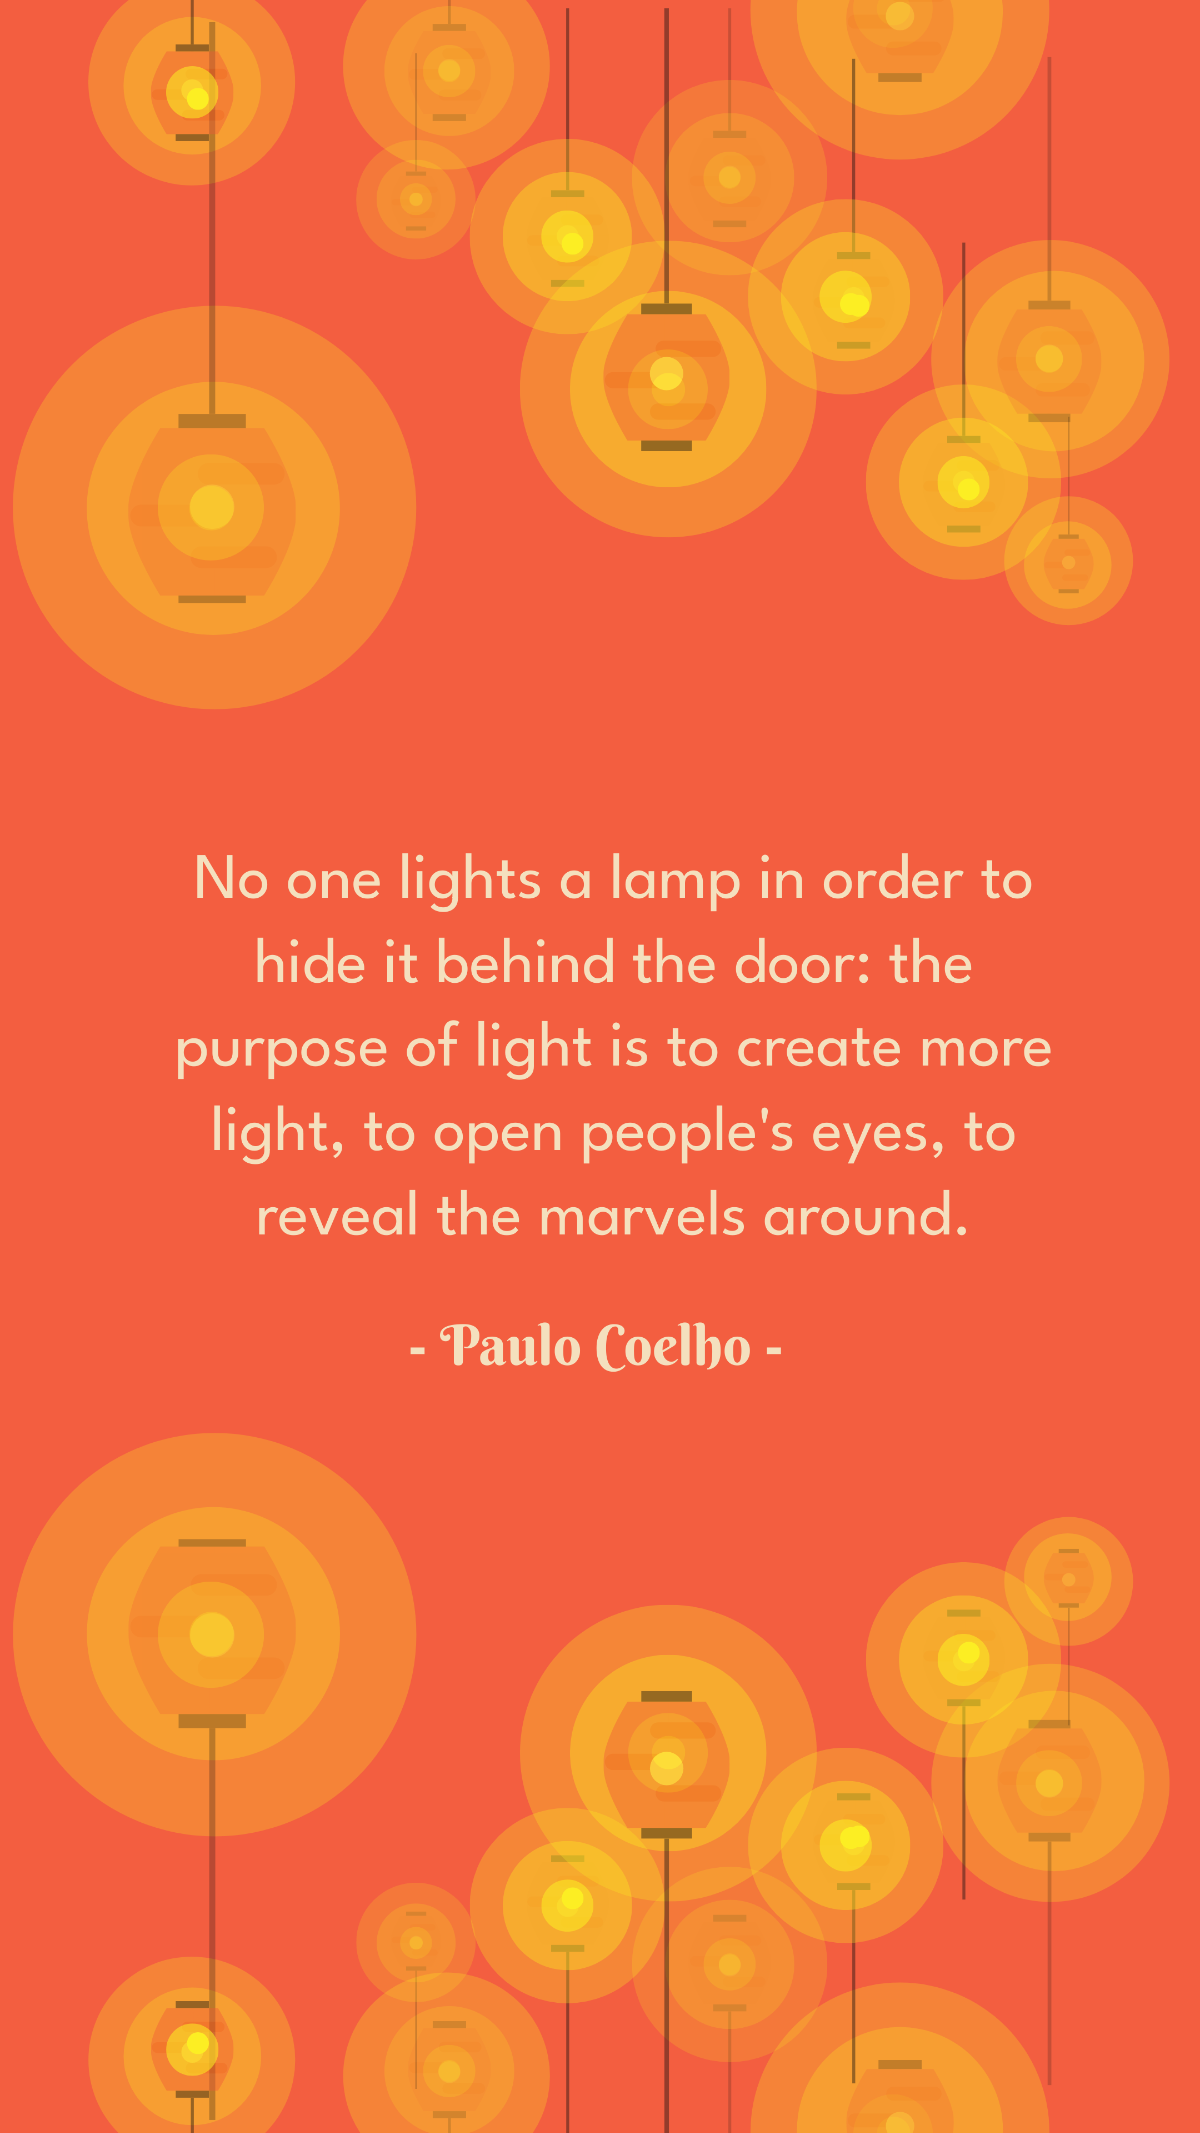  Chinese Lantern Festival Quote Template